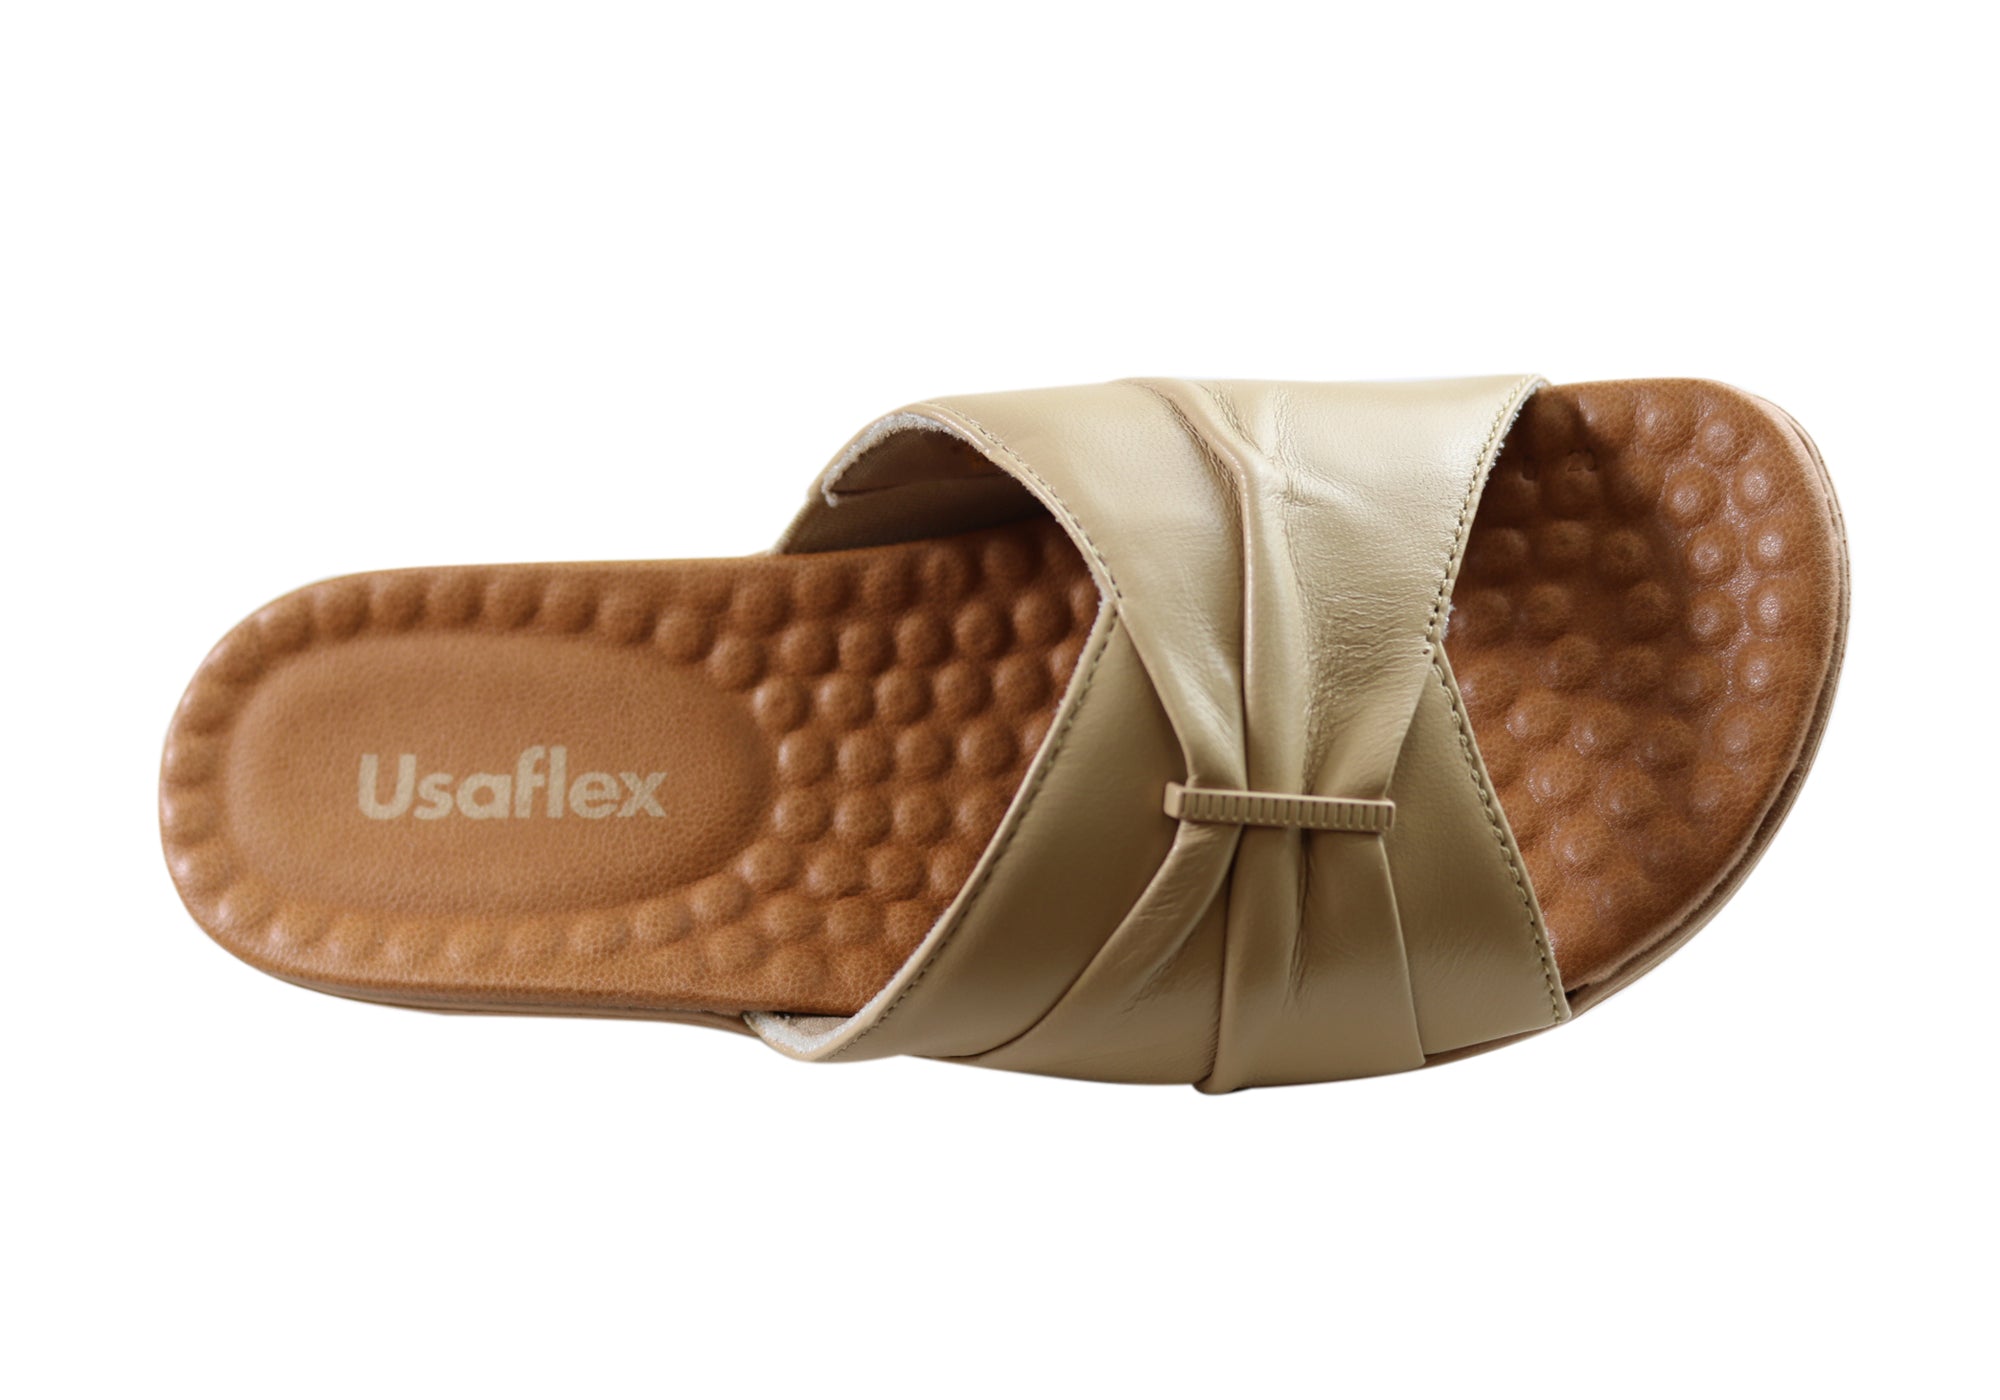 Usaflex Lucie Womens Comfort Leather Slides Sandals Made In Brazil